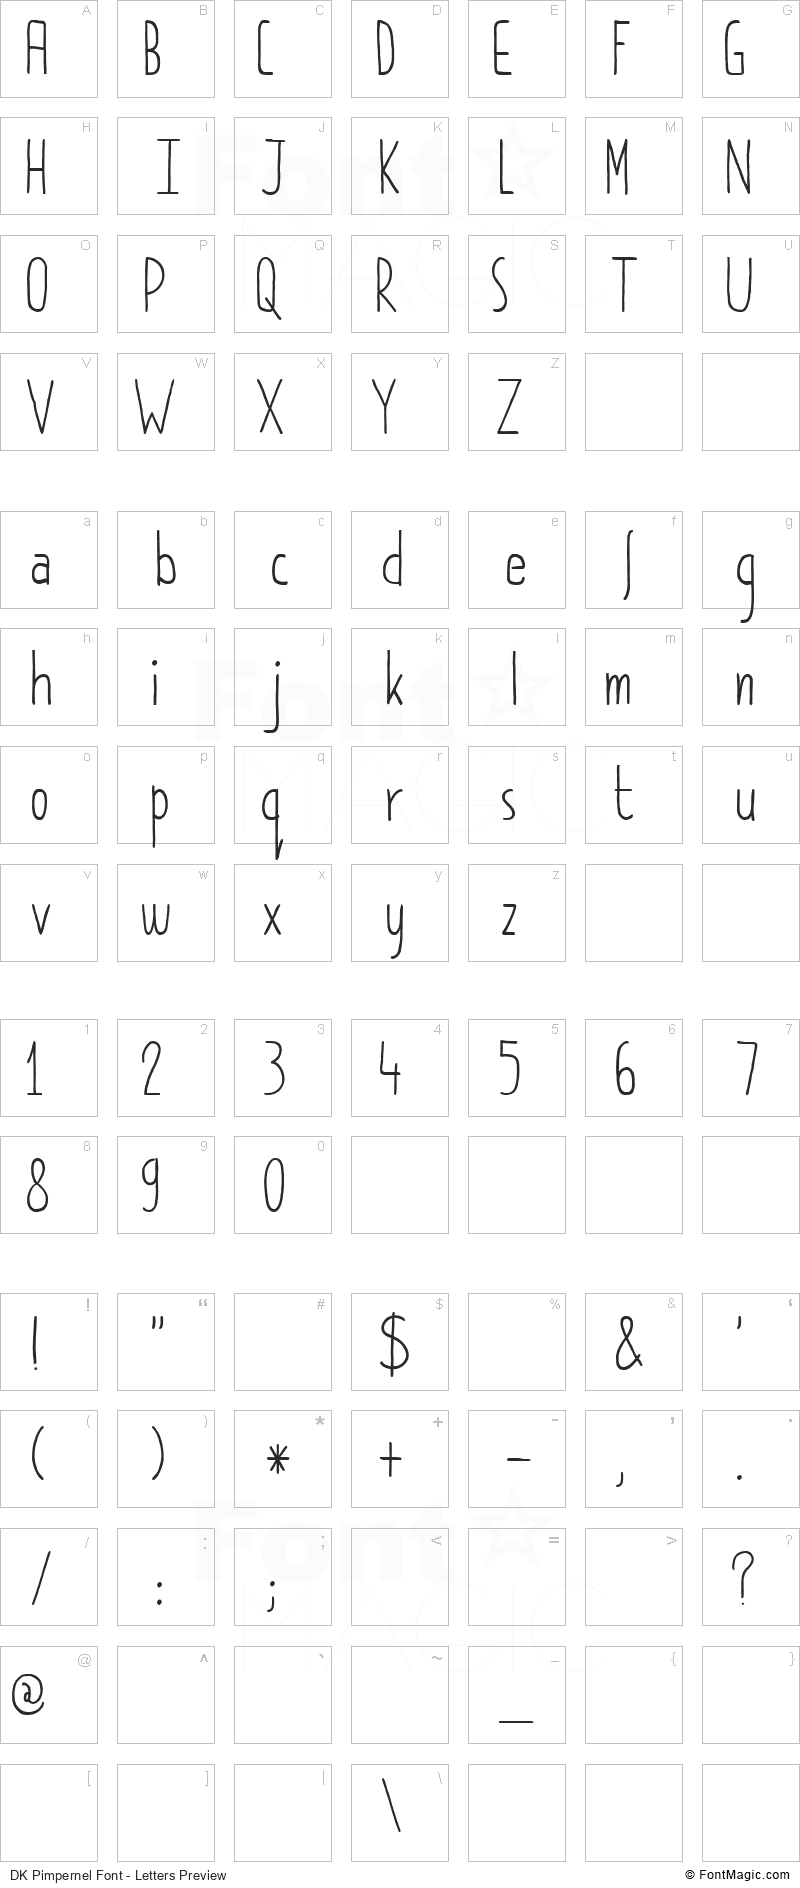 DK Pimpernel Font - All Latters Preview Chart